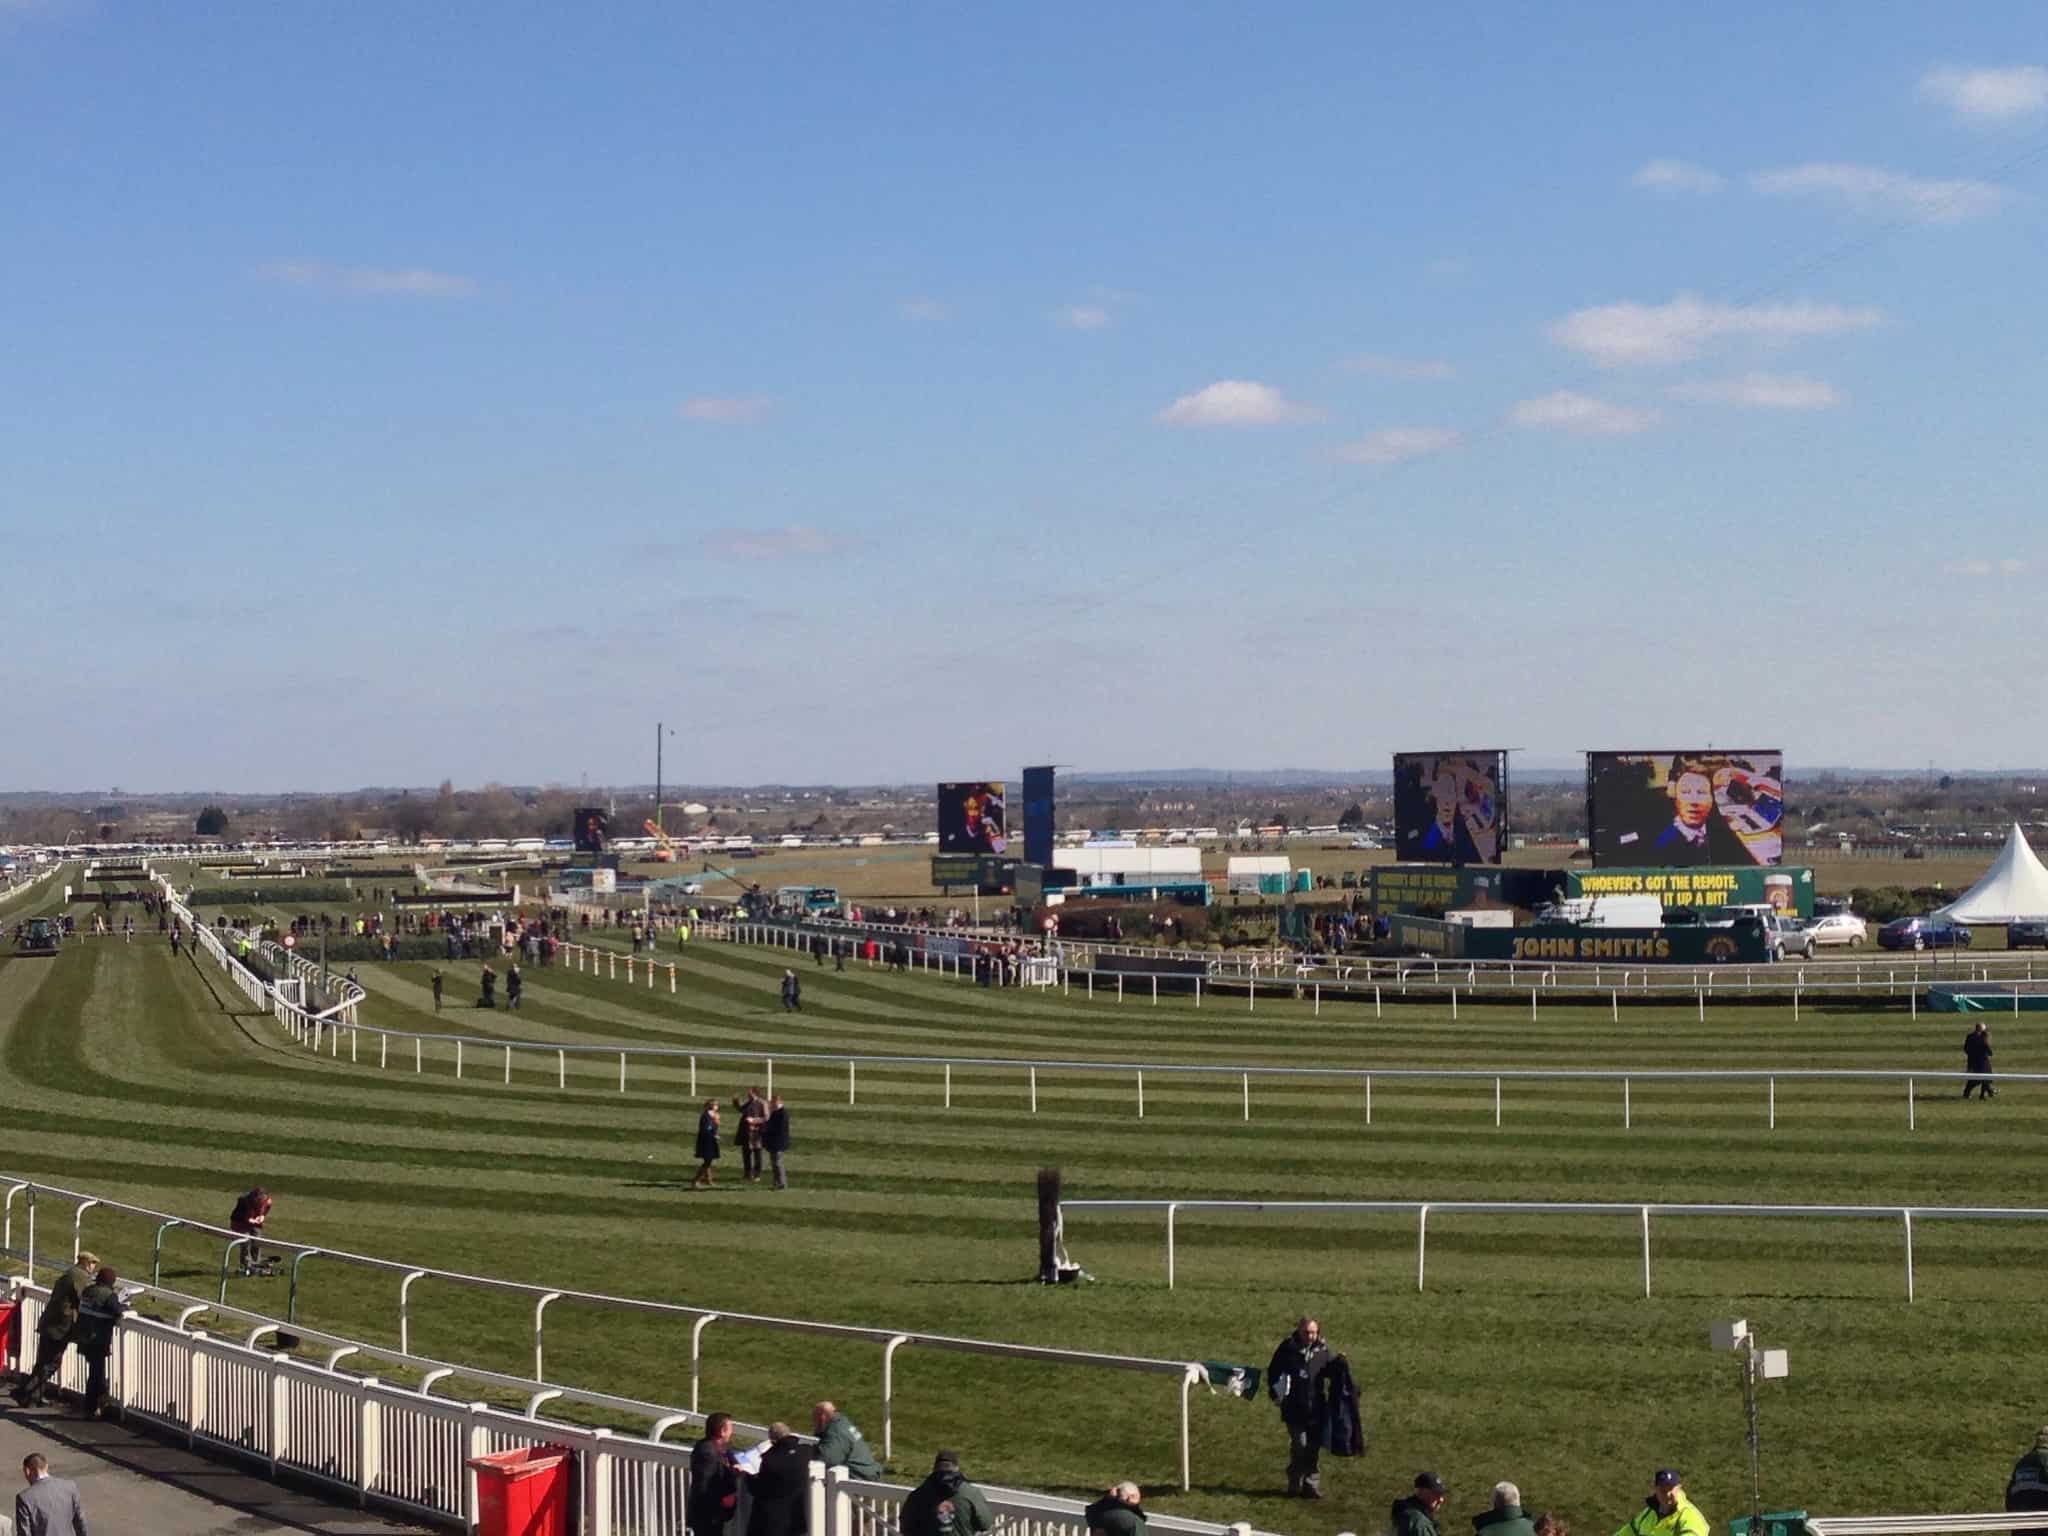 A Brief History of the Grand National